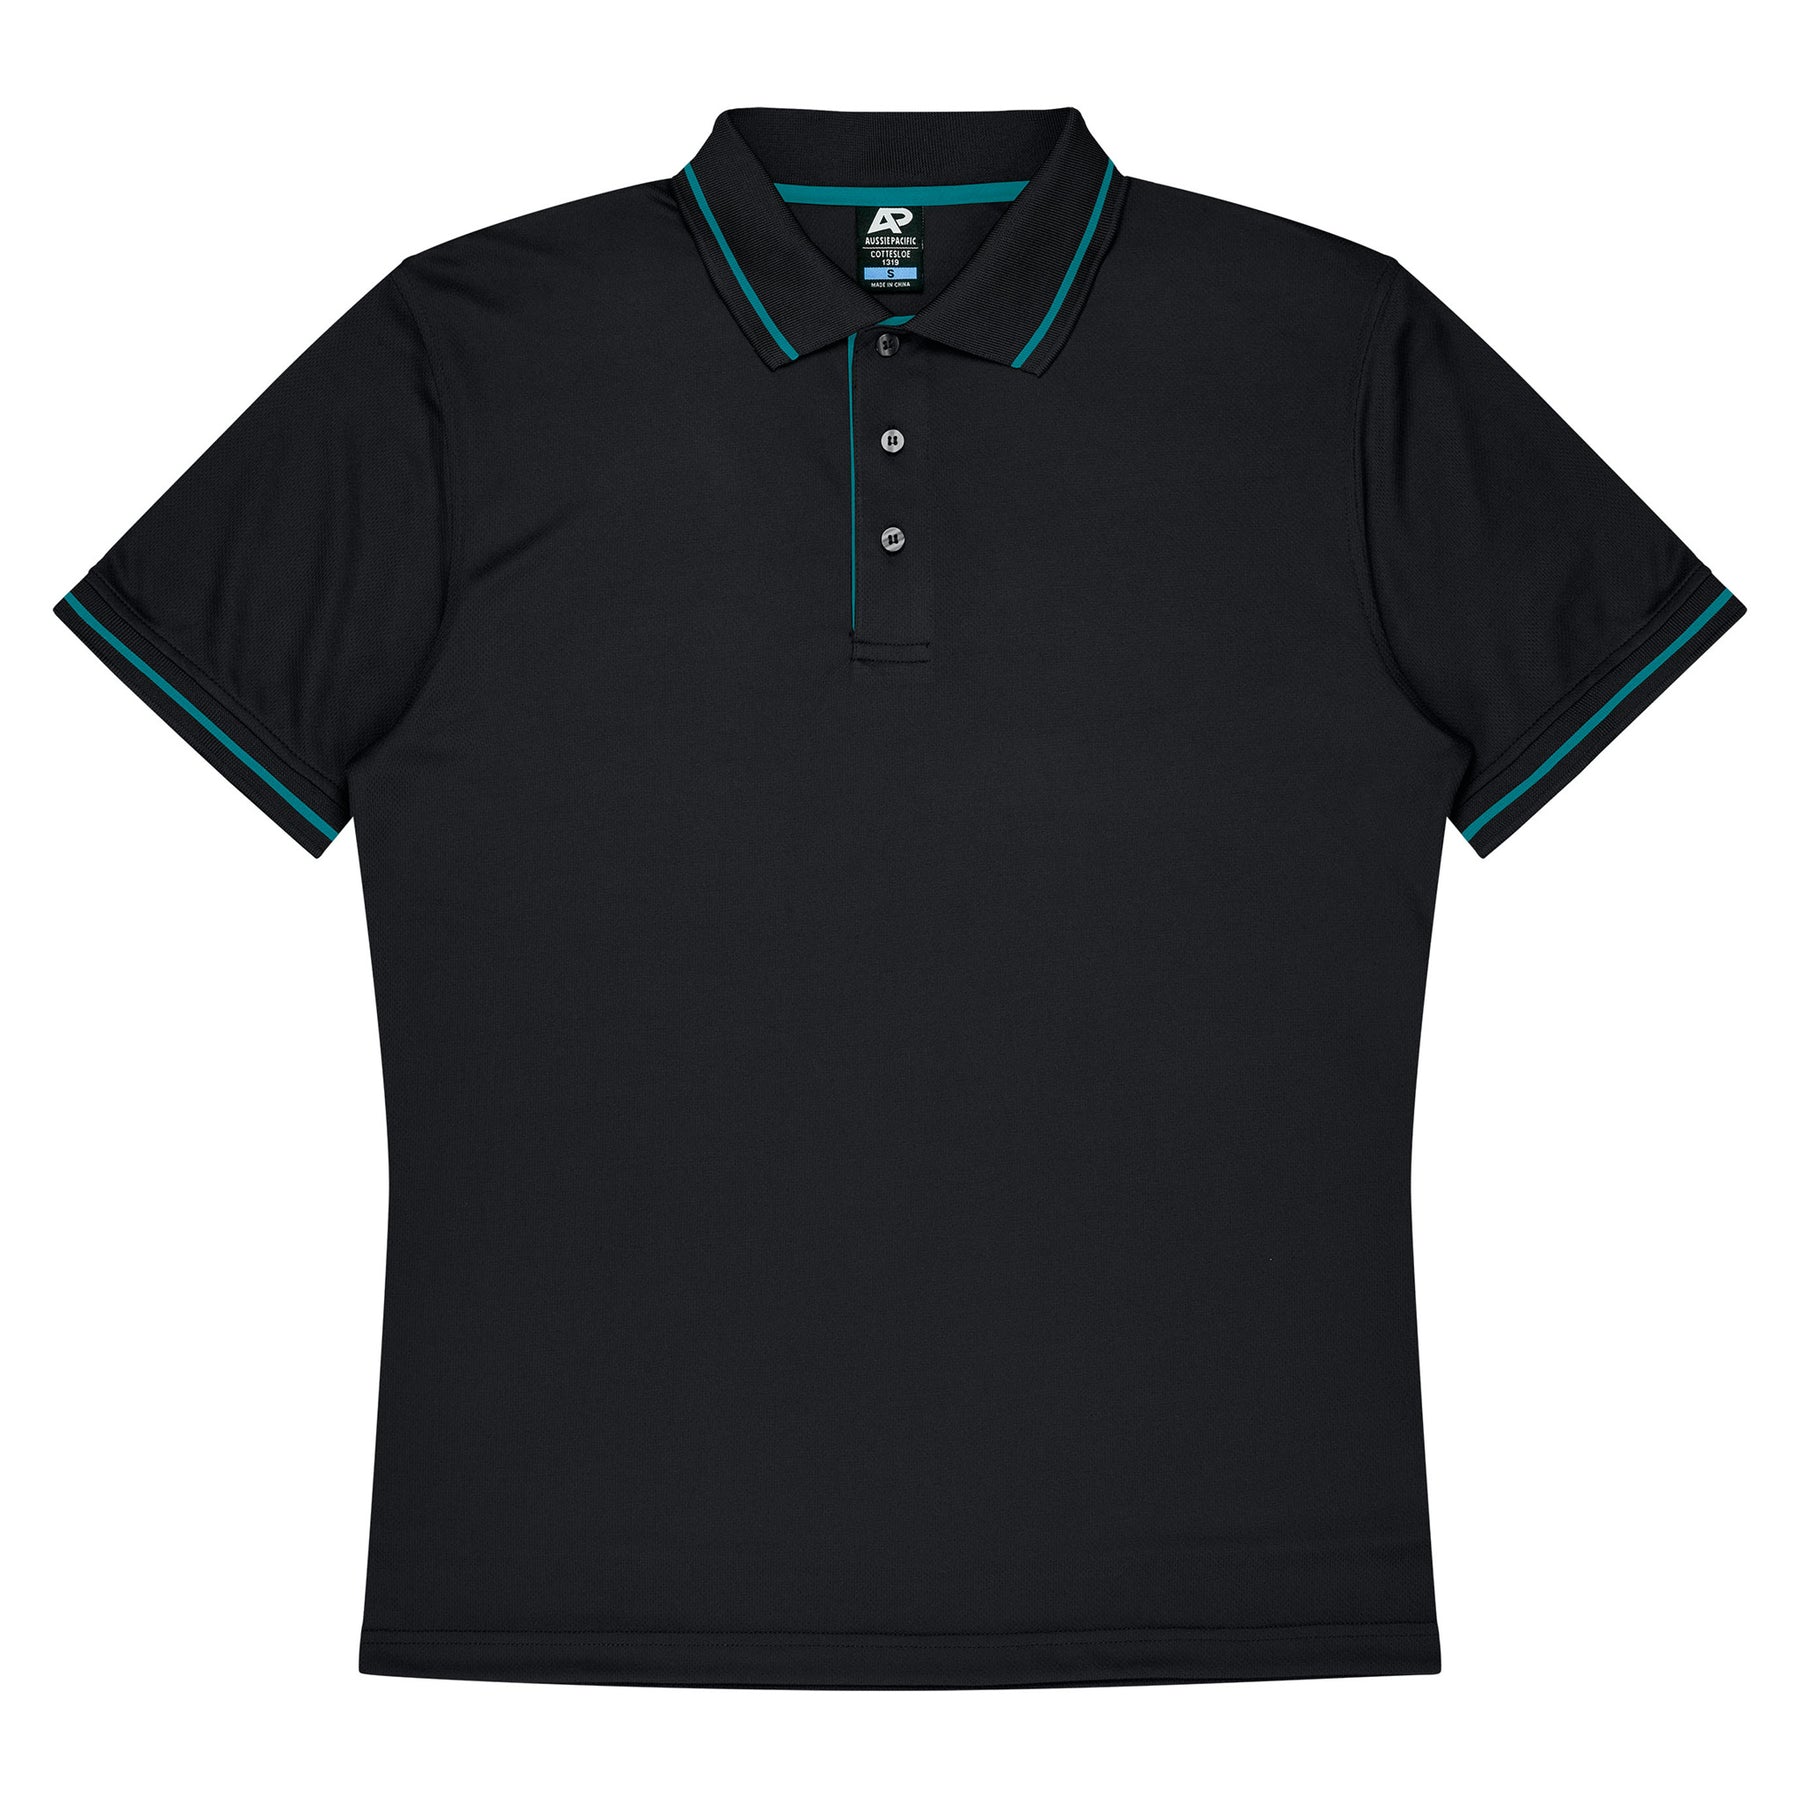 cottesloe kids polo in black teal